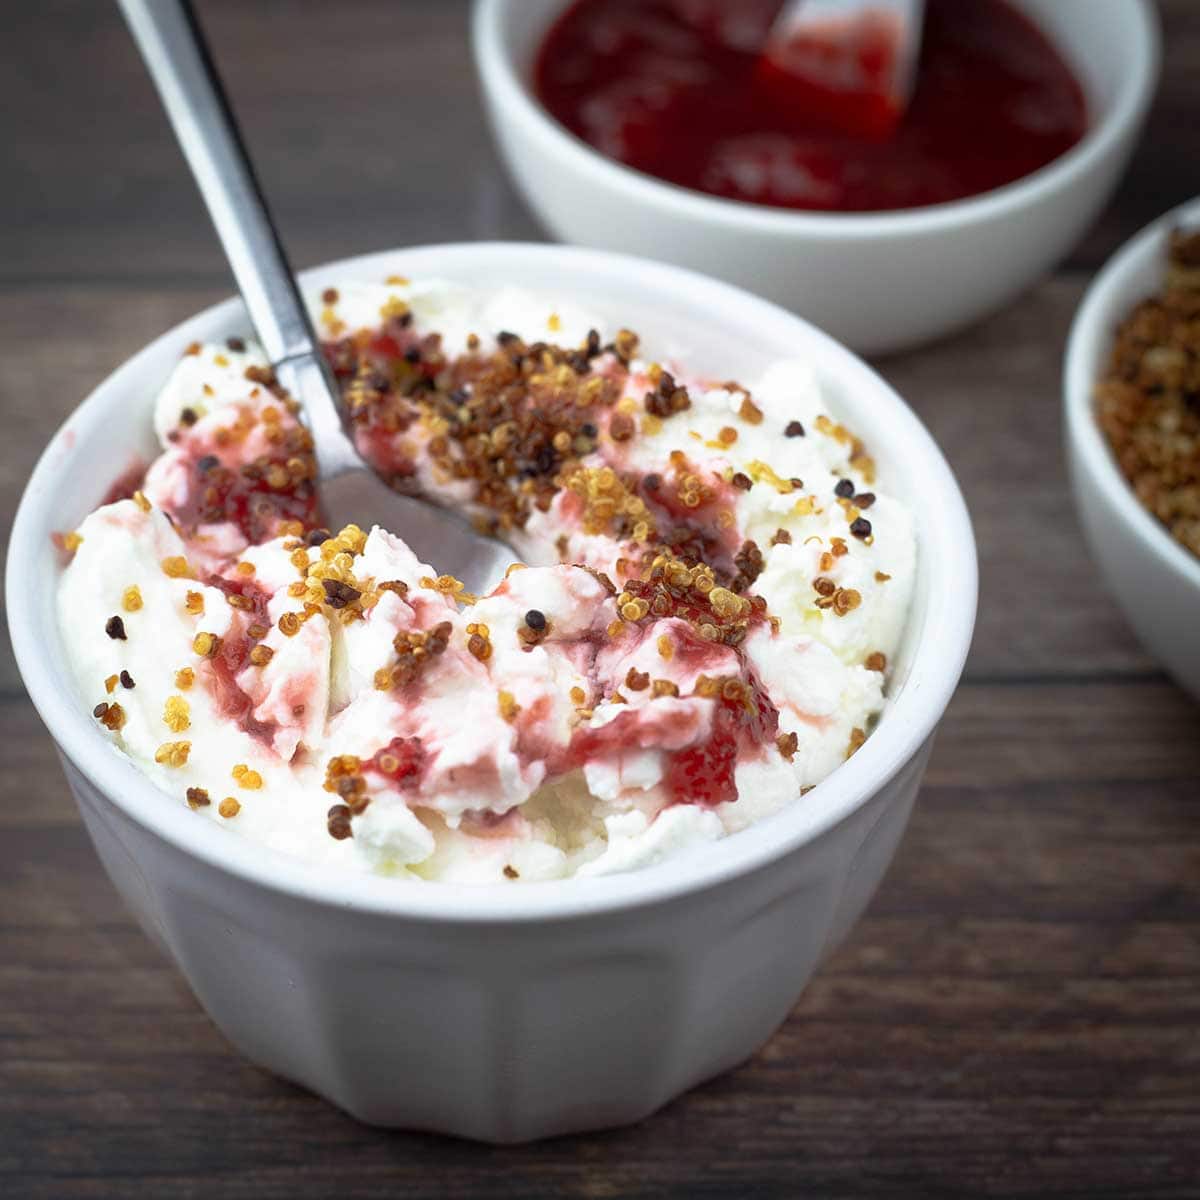 cold start yogurt in a bowl with strawberry preserves and quinoa crumble